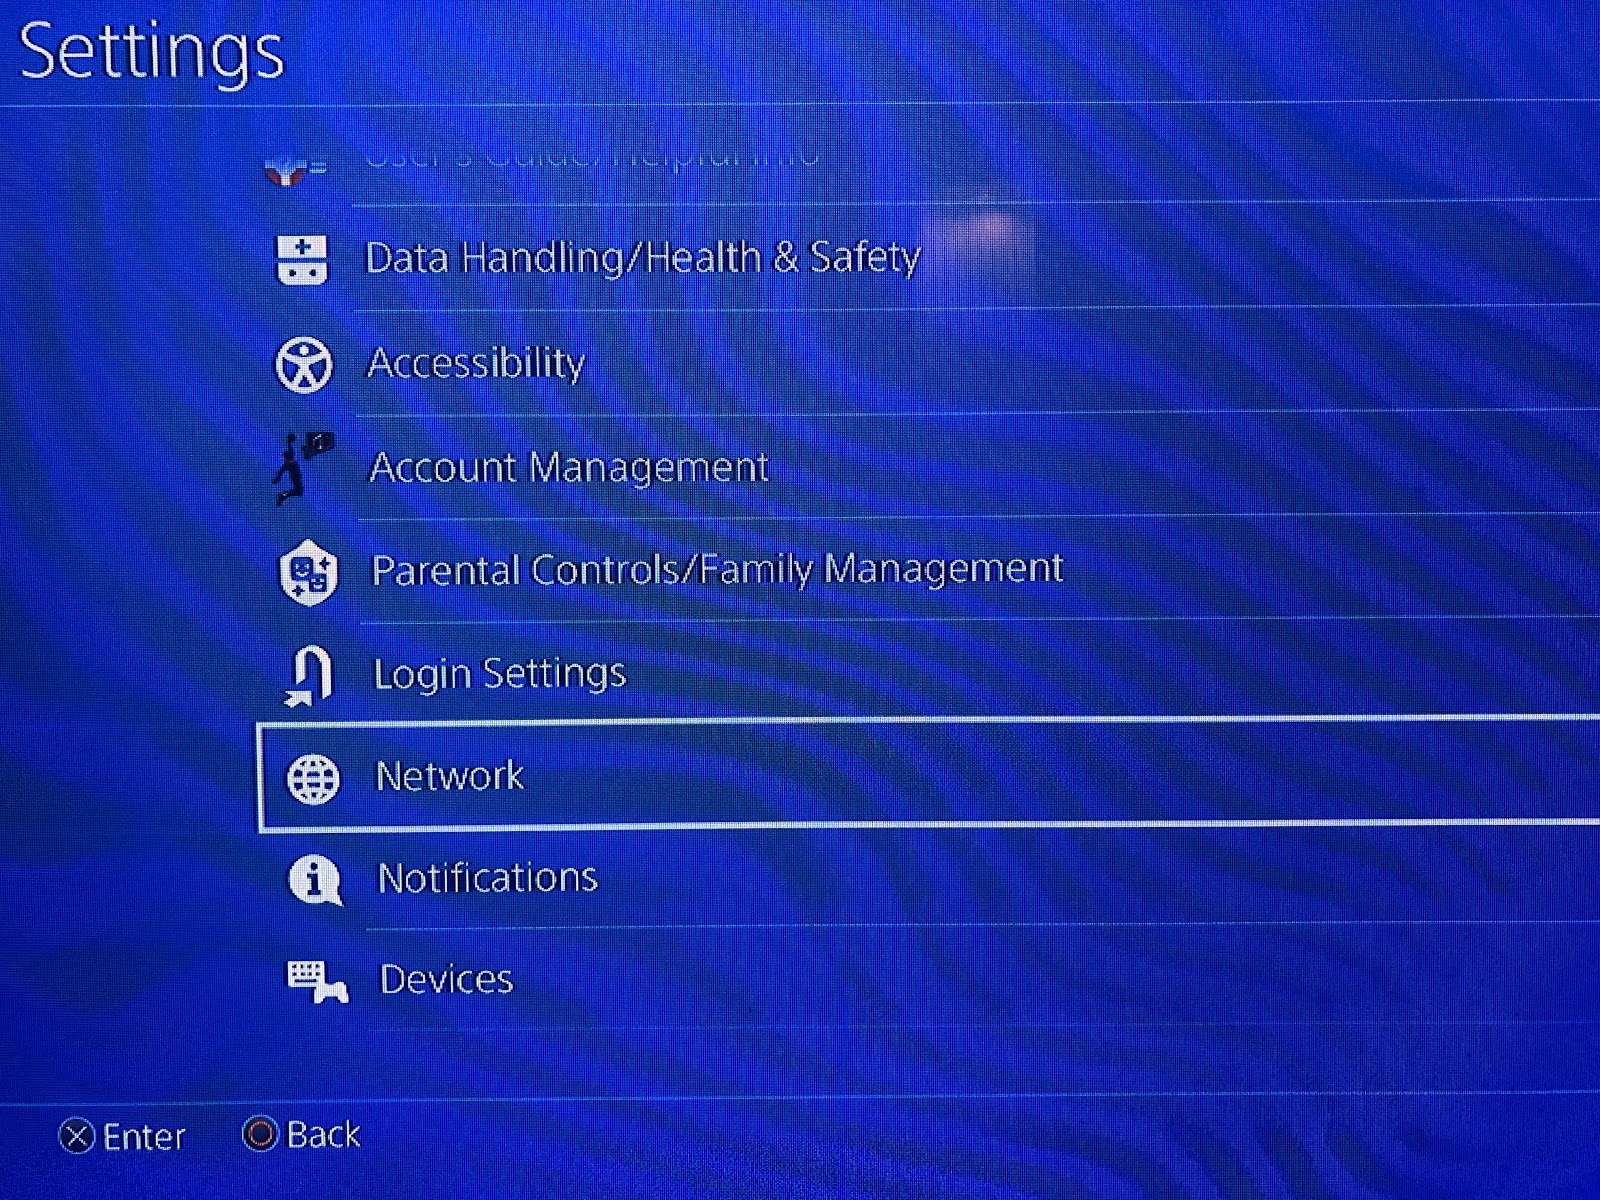 ps4 setting up lan connection